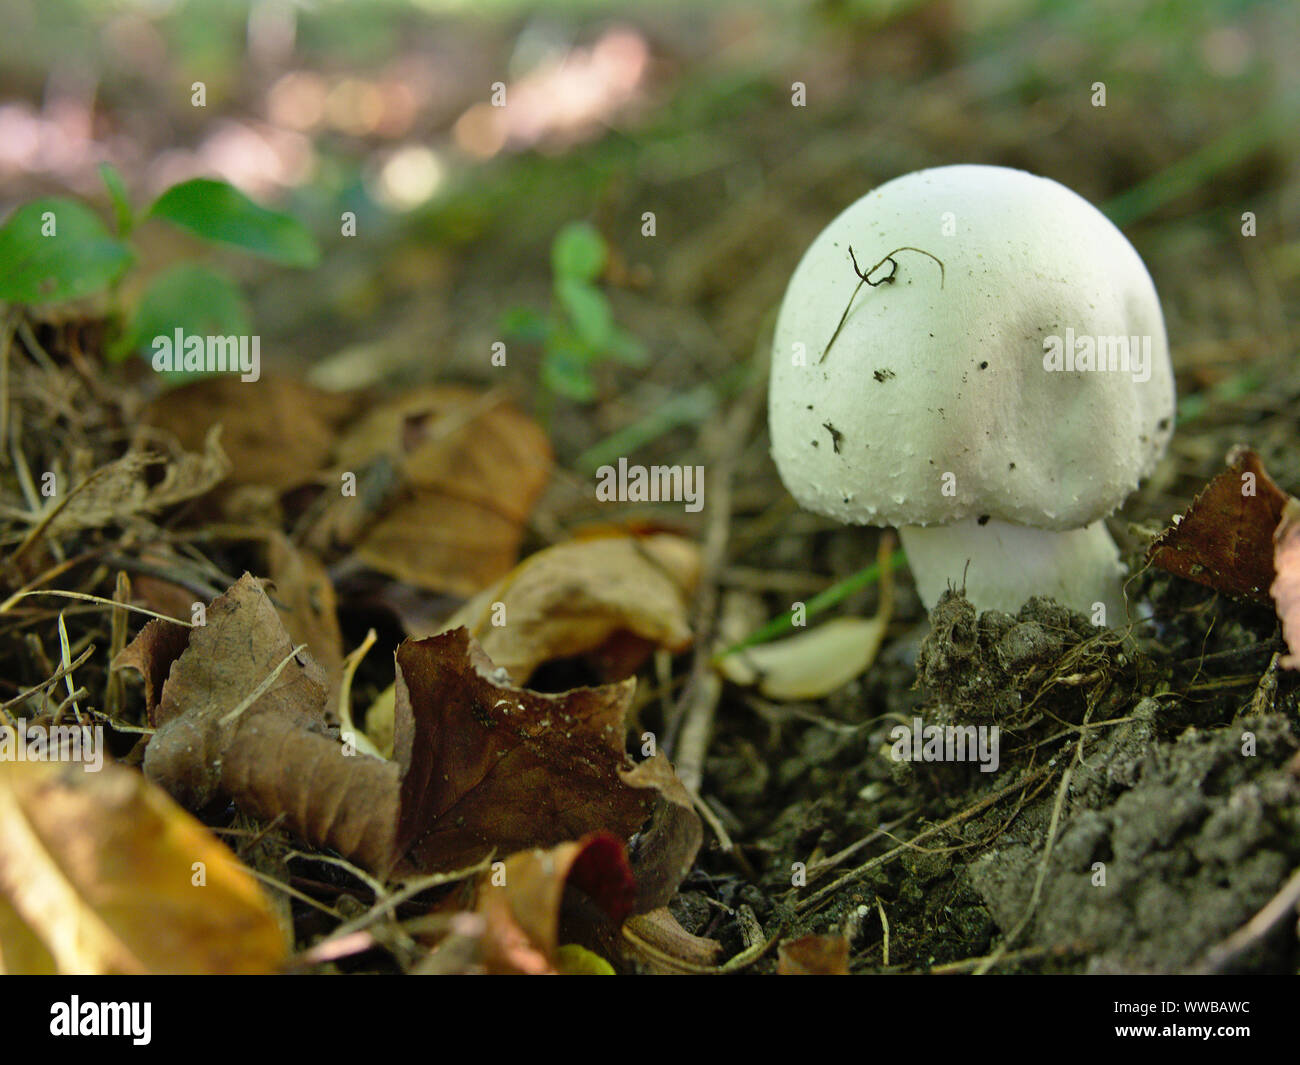 Mushrooms proliferating during a warm, wet September, Ottawa, Ontario, Canada.  Field Mushroom (Agaricus campestris) in leaf litter by the cycle path. Stock Photo